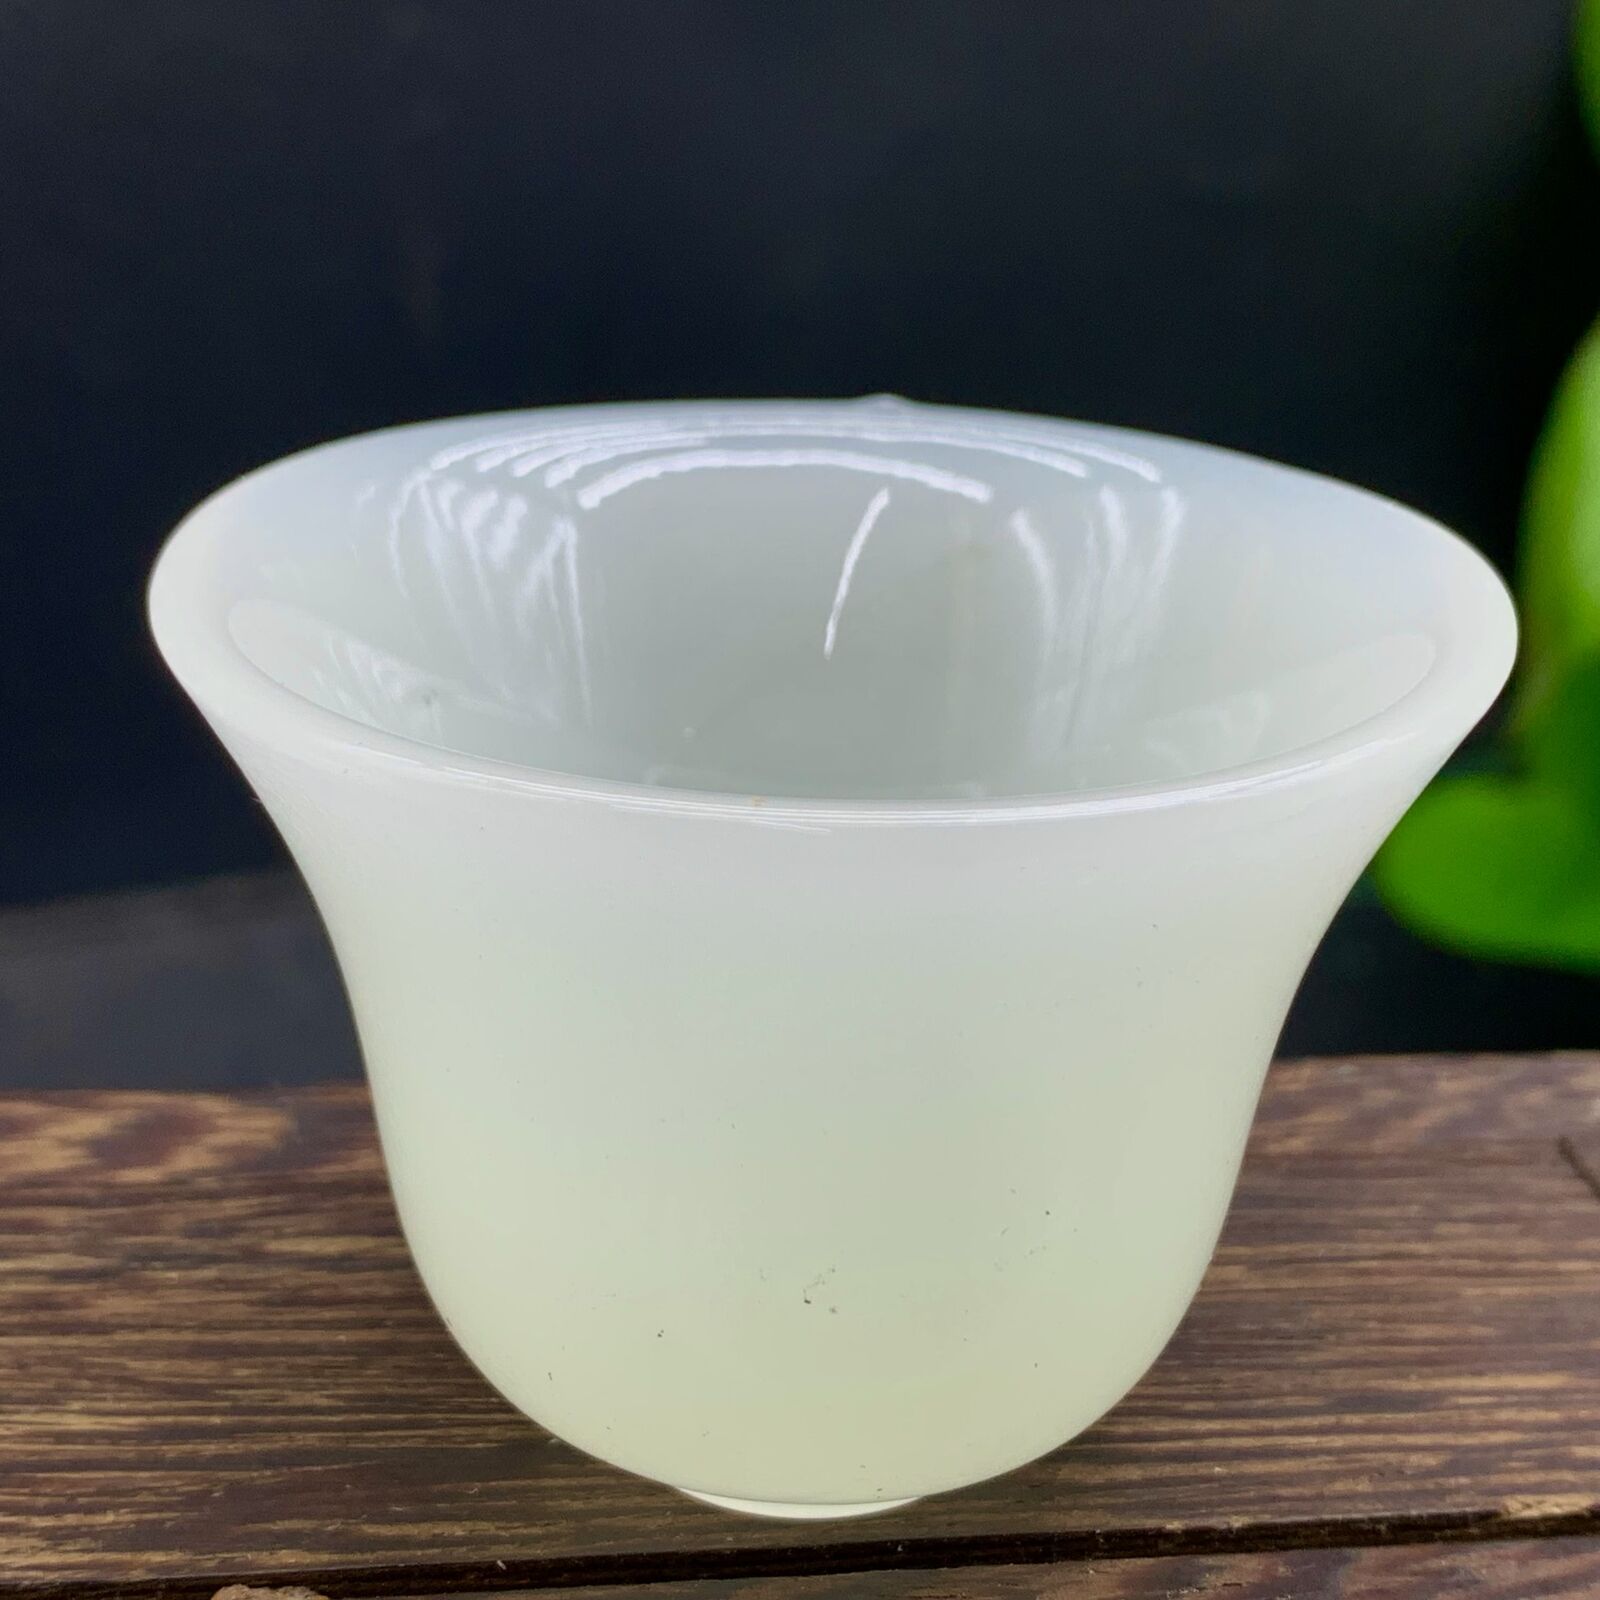 72G Exquisite white transparent colored glaze crystal tea cup sample healing